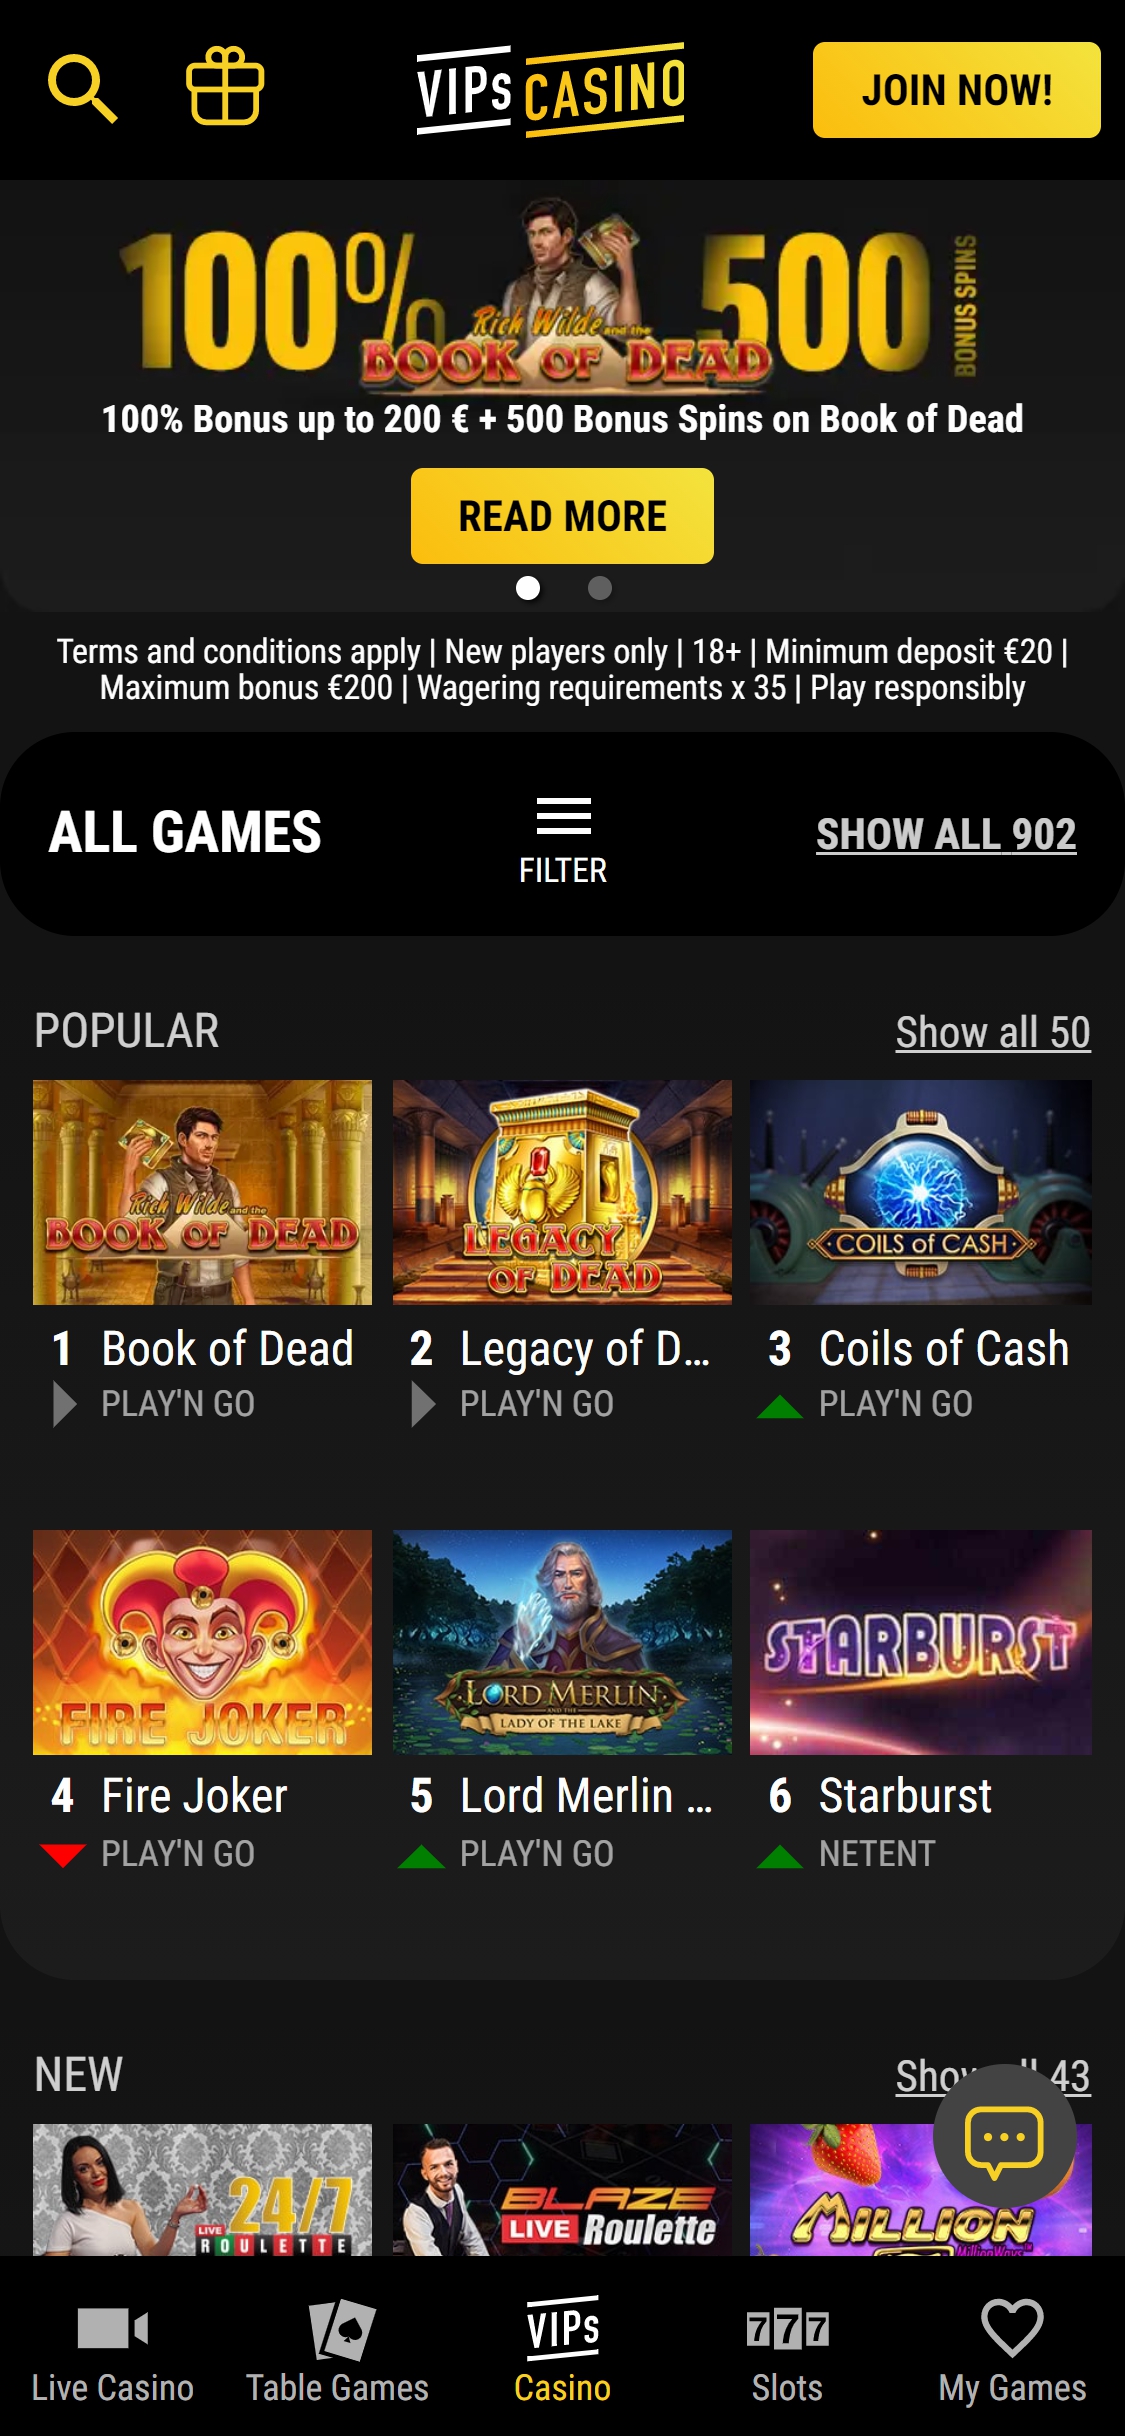 VIPs Casino Mobile Review